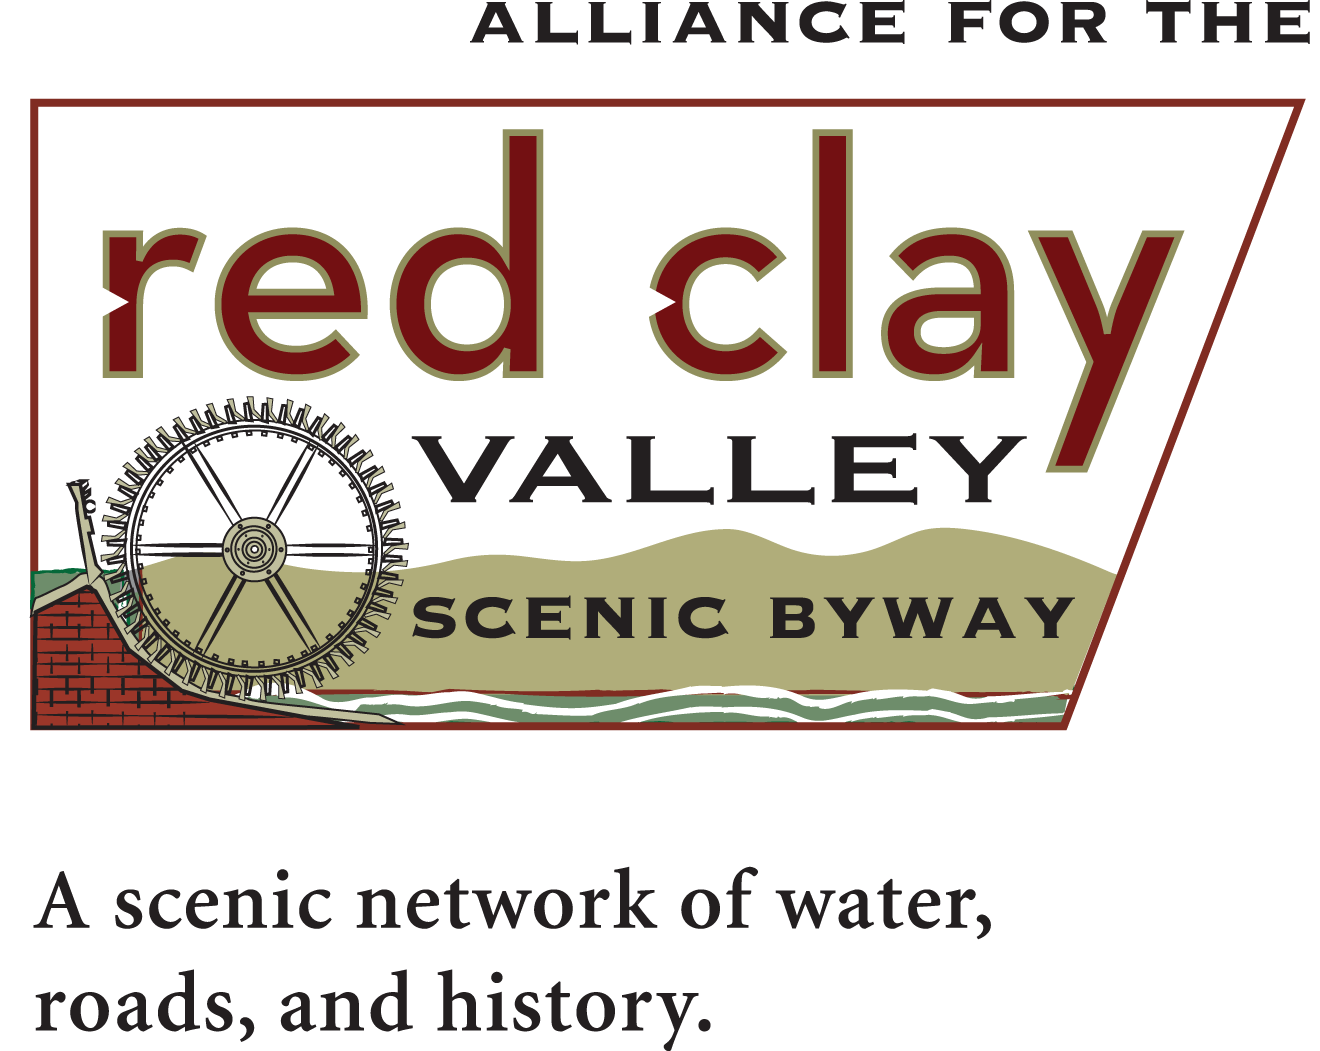 Red Clay Valley Logo 